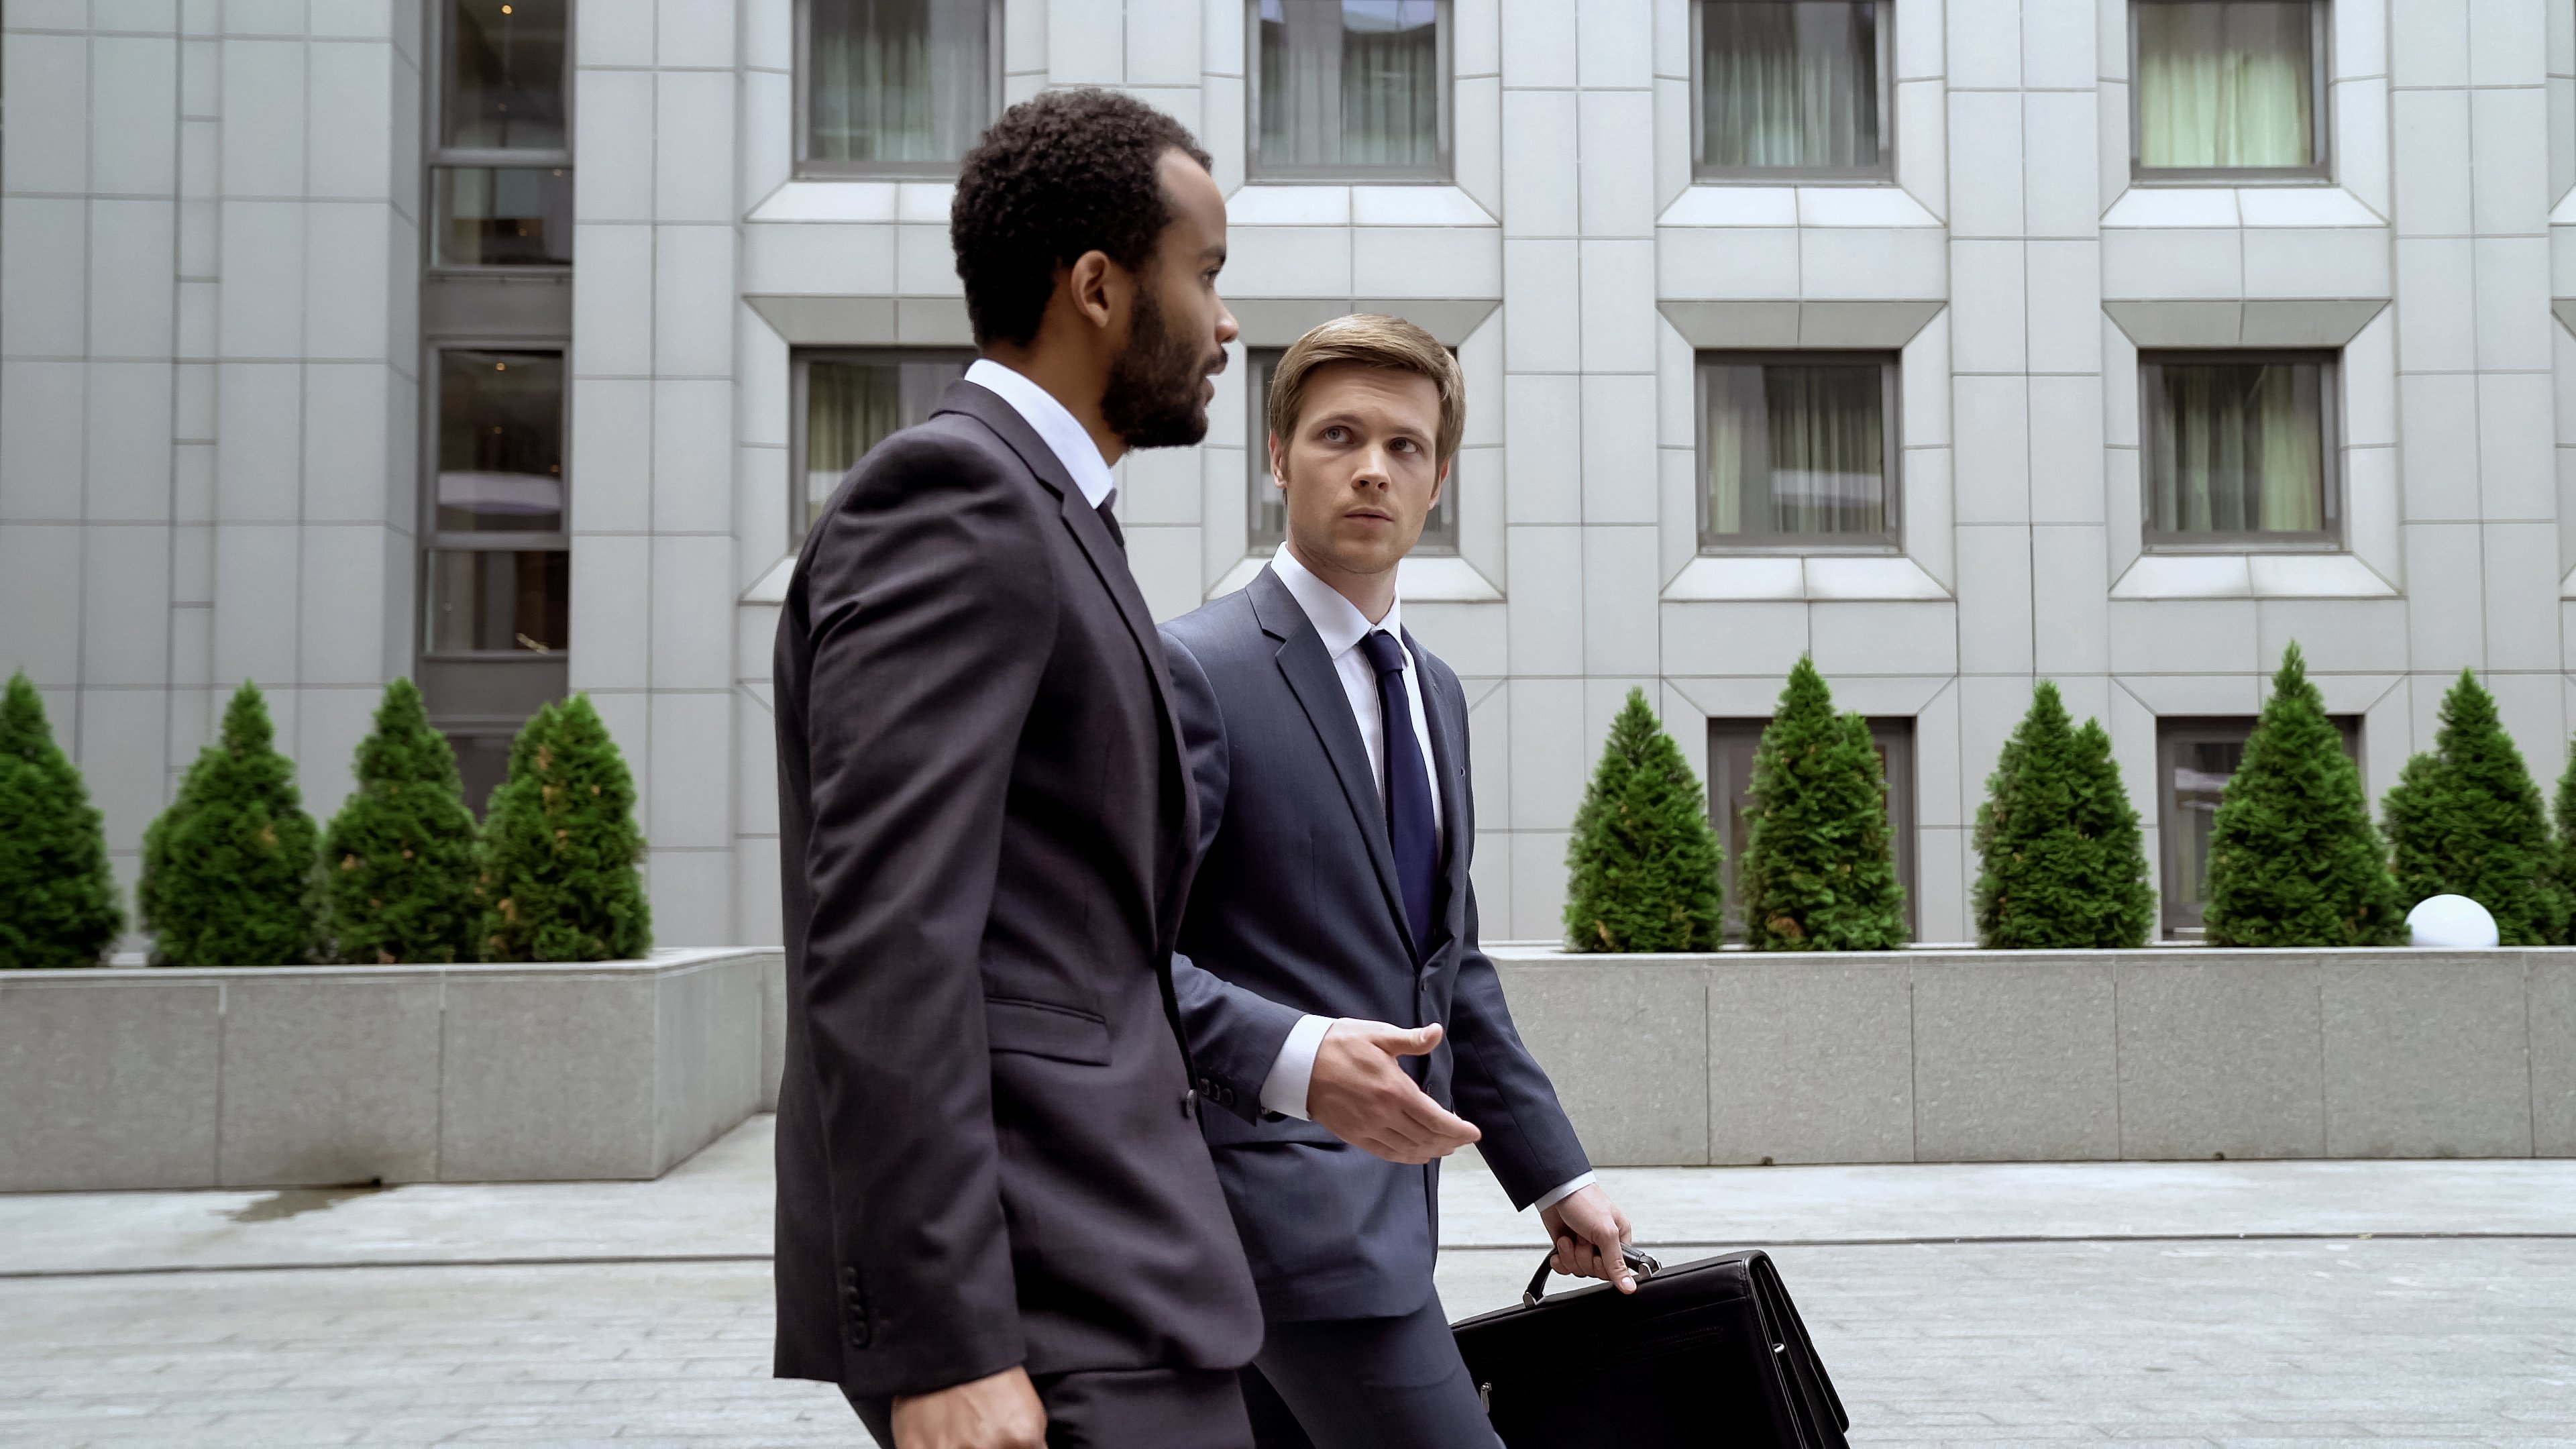 Two men in suits walking outside a large building